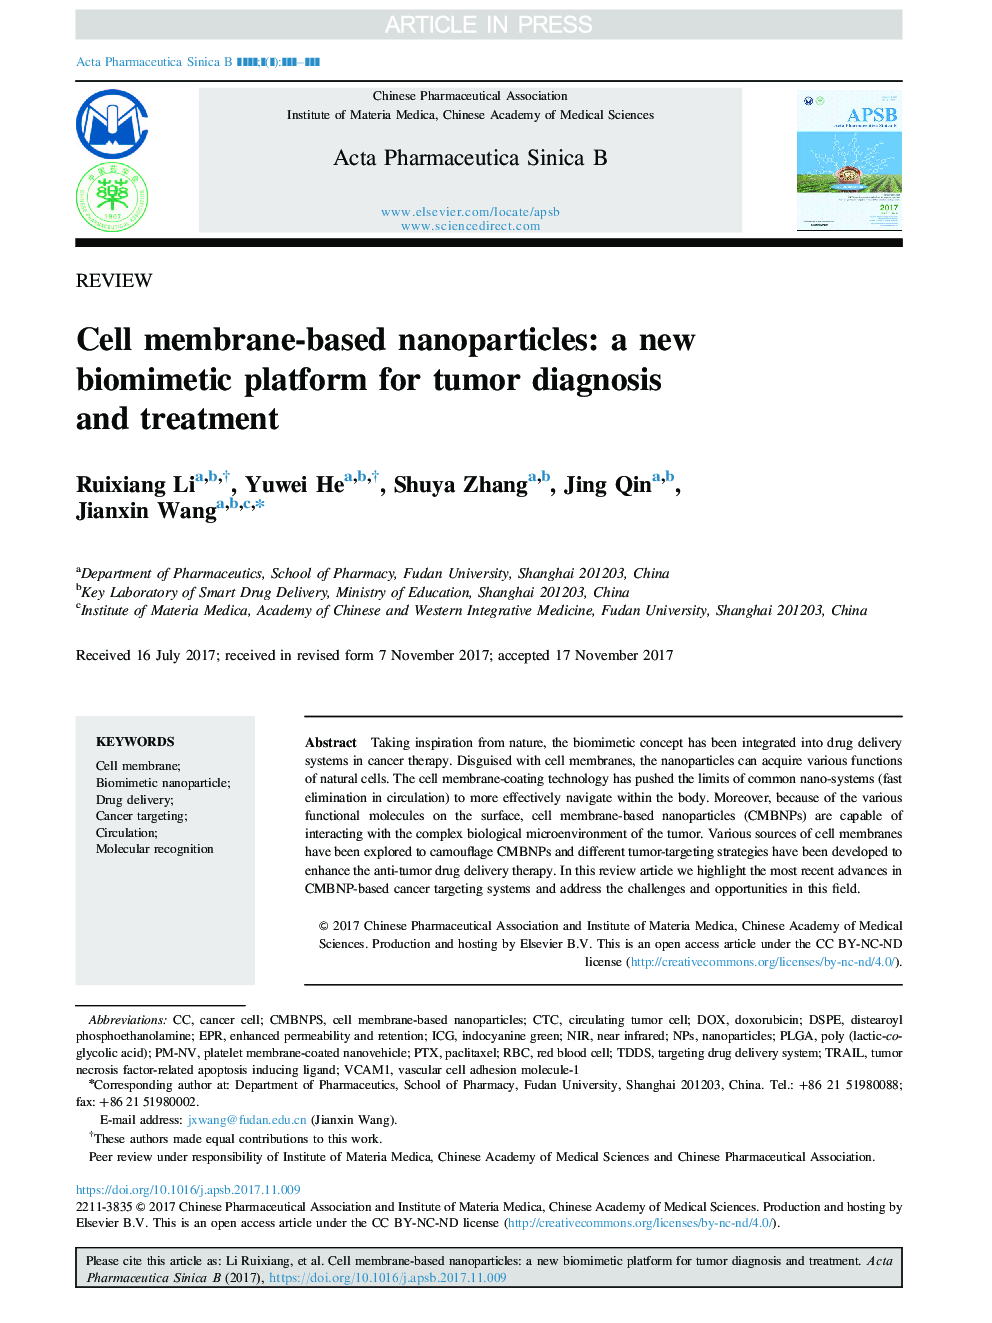 Cell membrane-based nanoparticles: a new biomimetic platform for tumor diagnosis and treatment